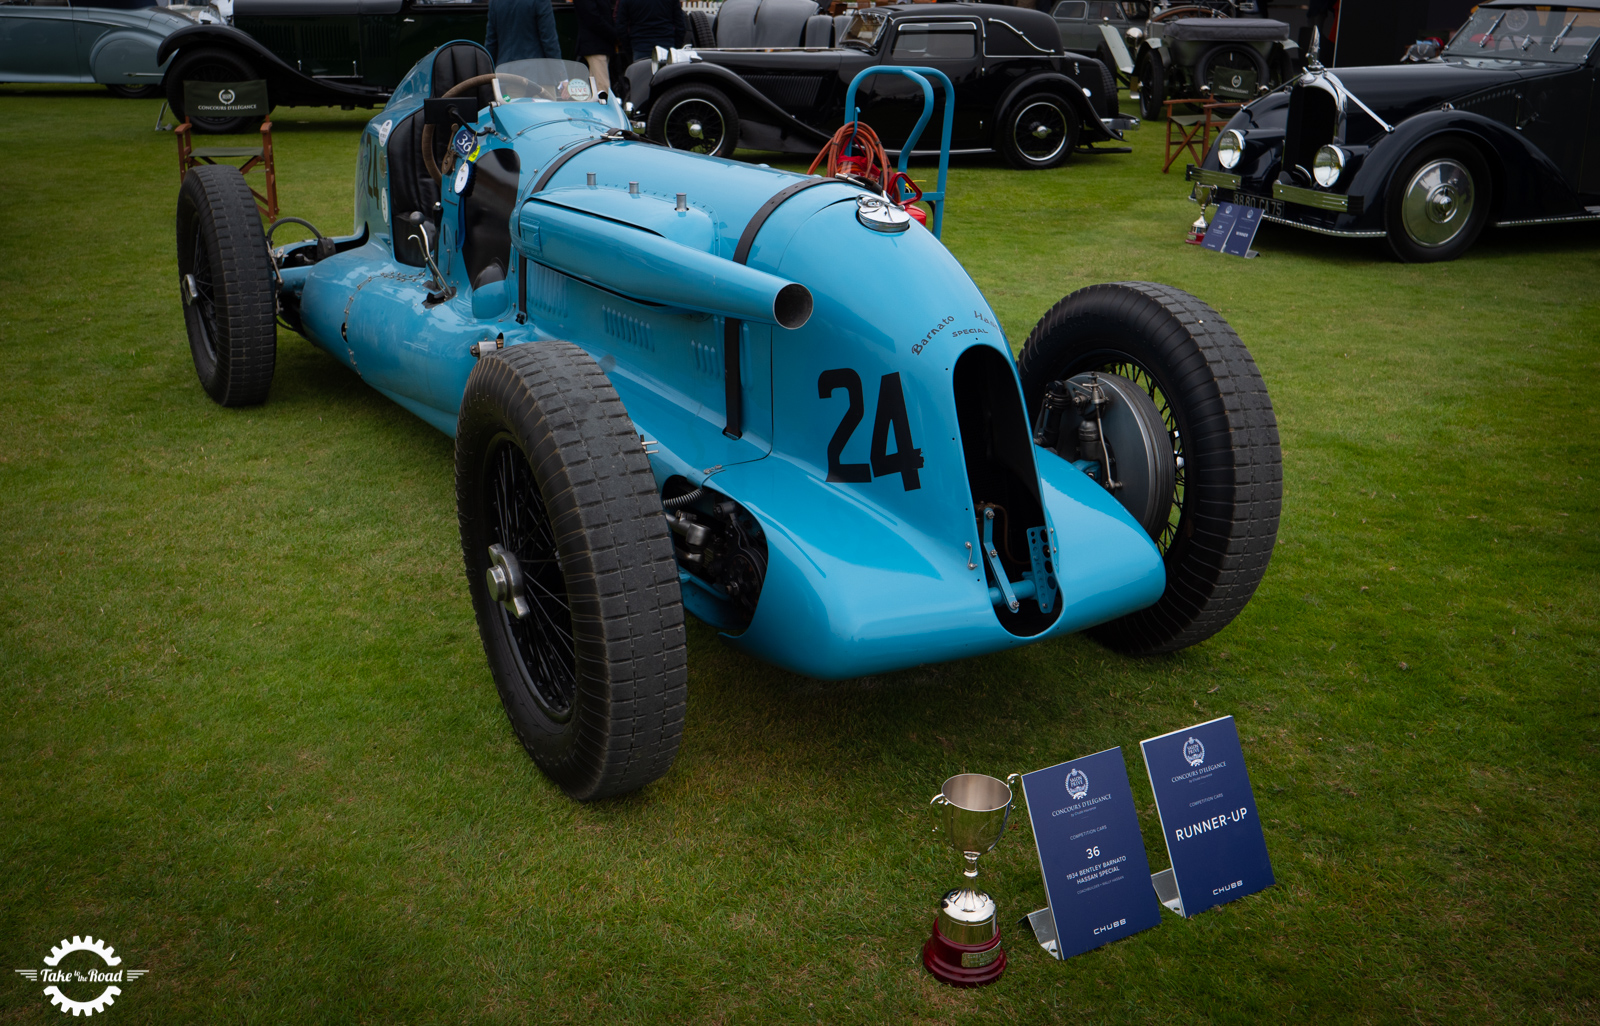 Highlights from Salon Prive Concours D'Elegance 2019